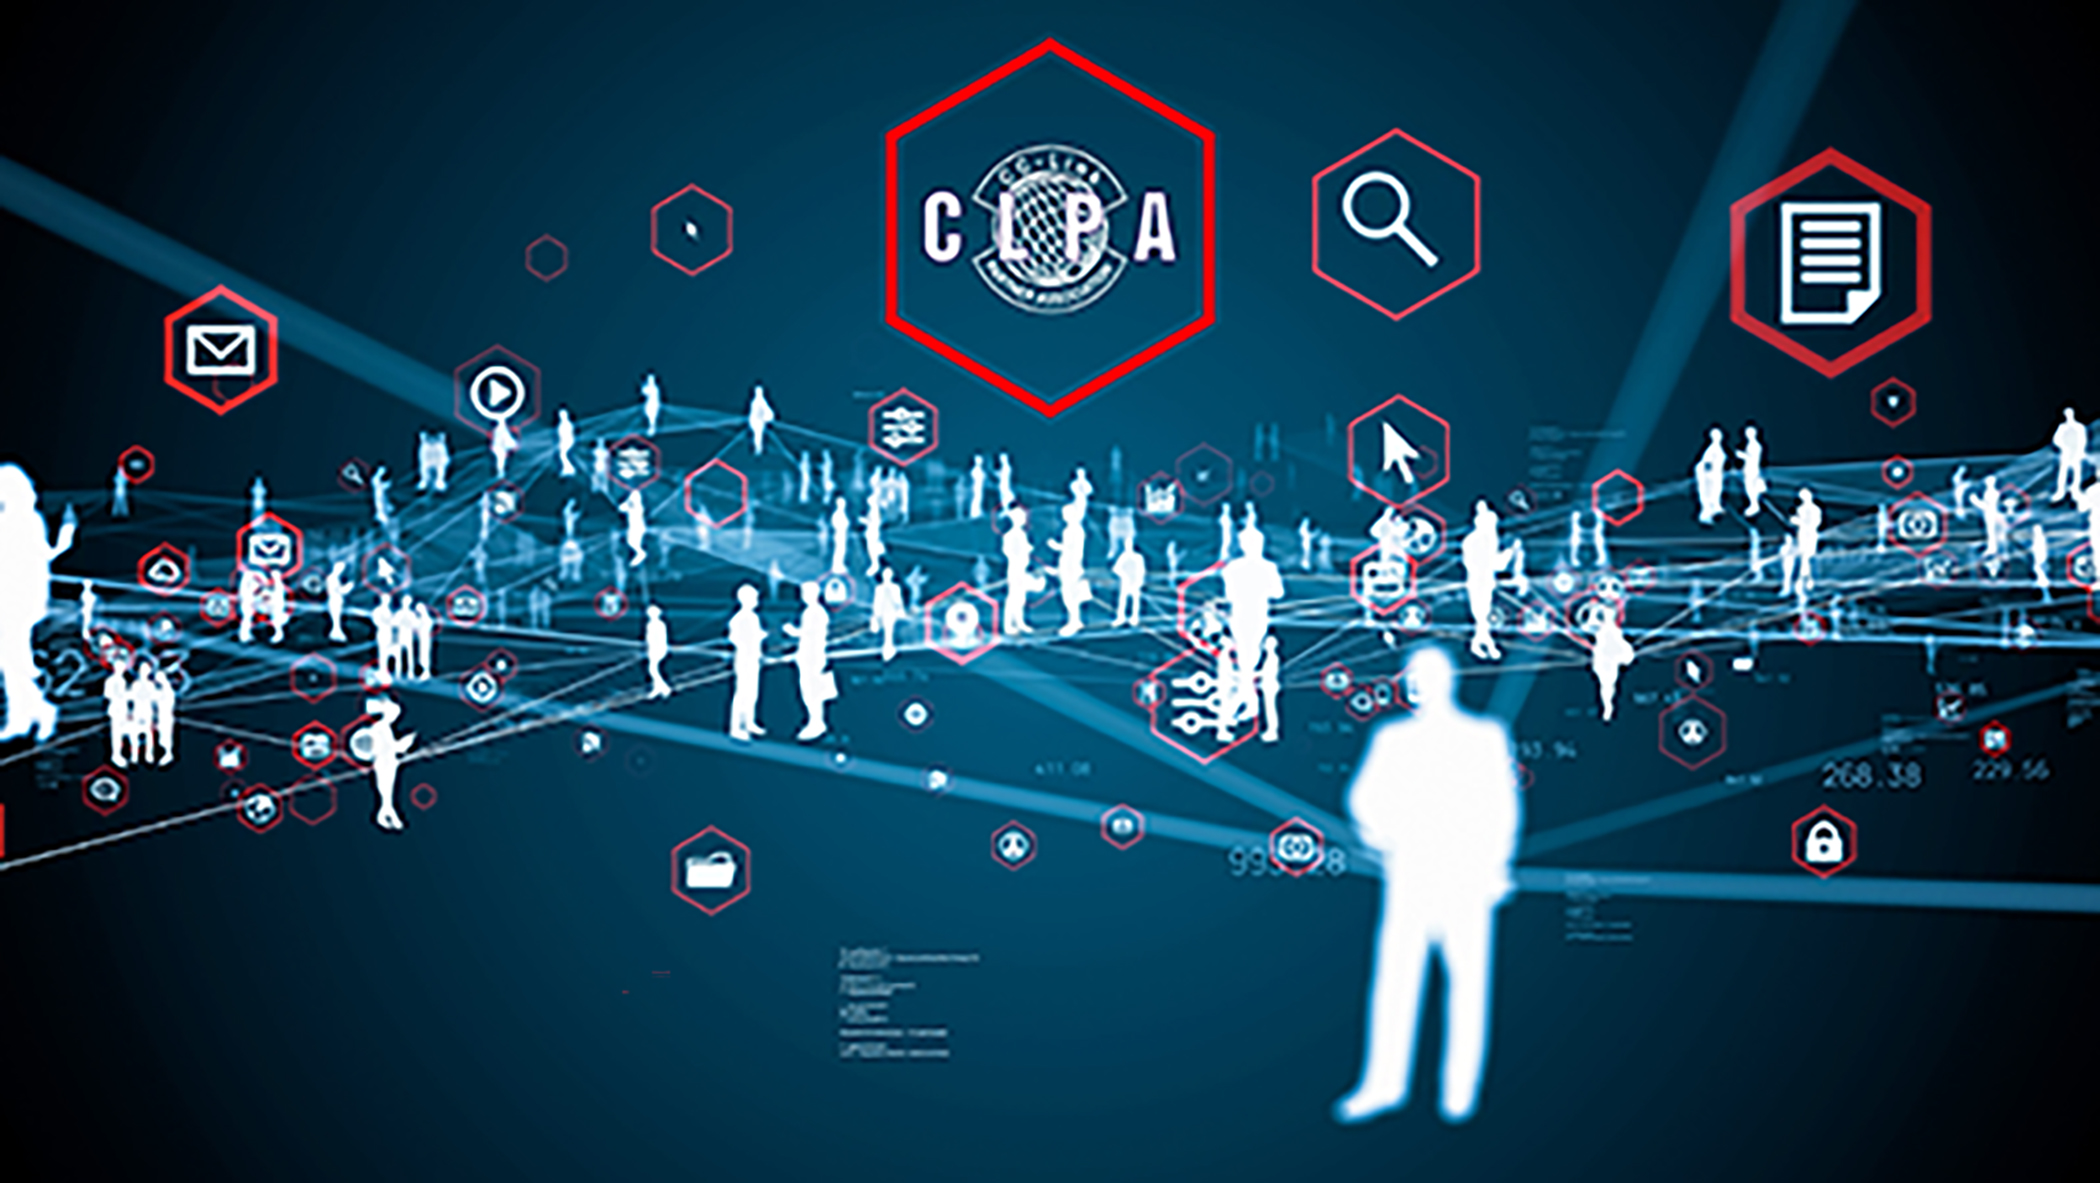 CLPA helps businesses create interconnected e-F@ctory systems and drive sales (©istock/metamorworks)